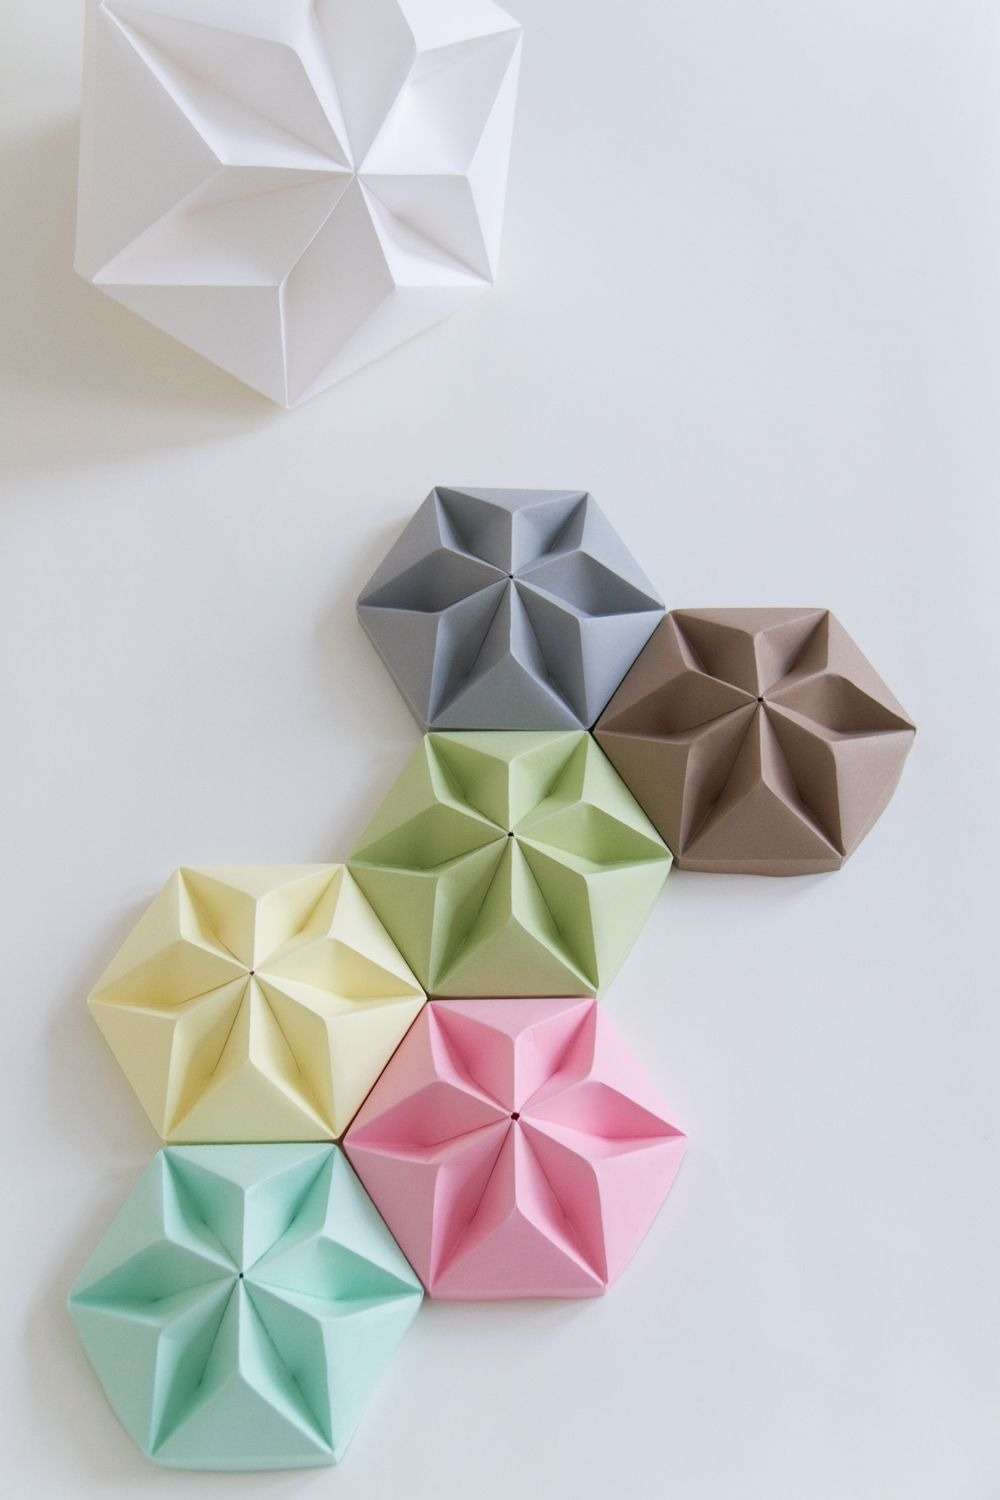 Origami Ideas Step By Step 40 Origami Flowers You Can Do Origami Ideas Origami And